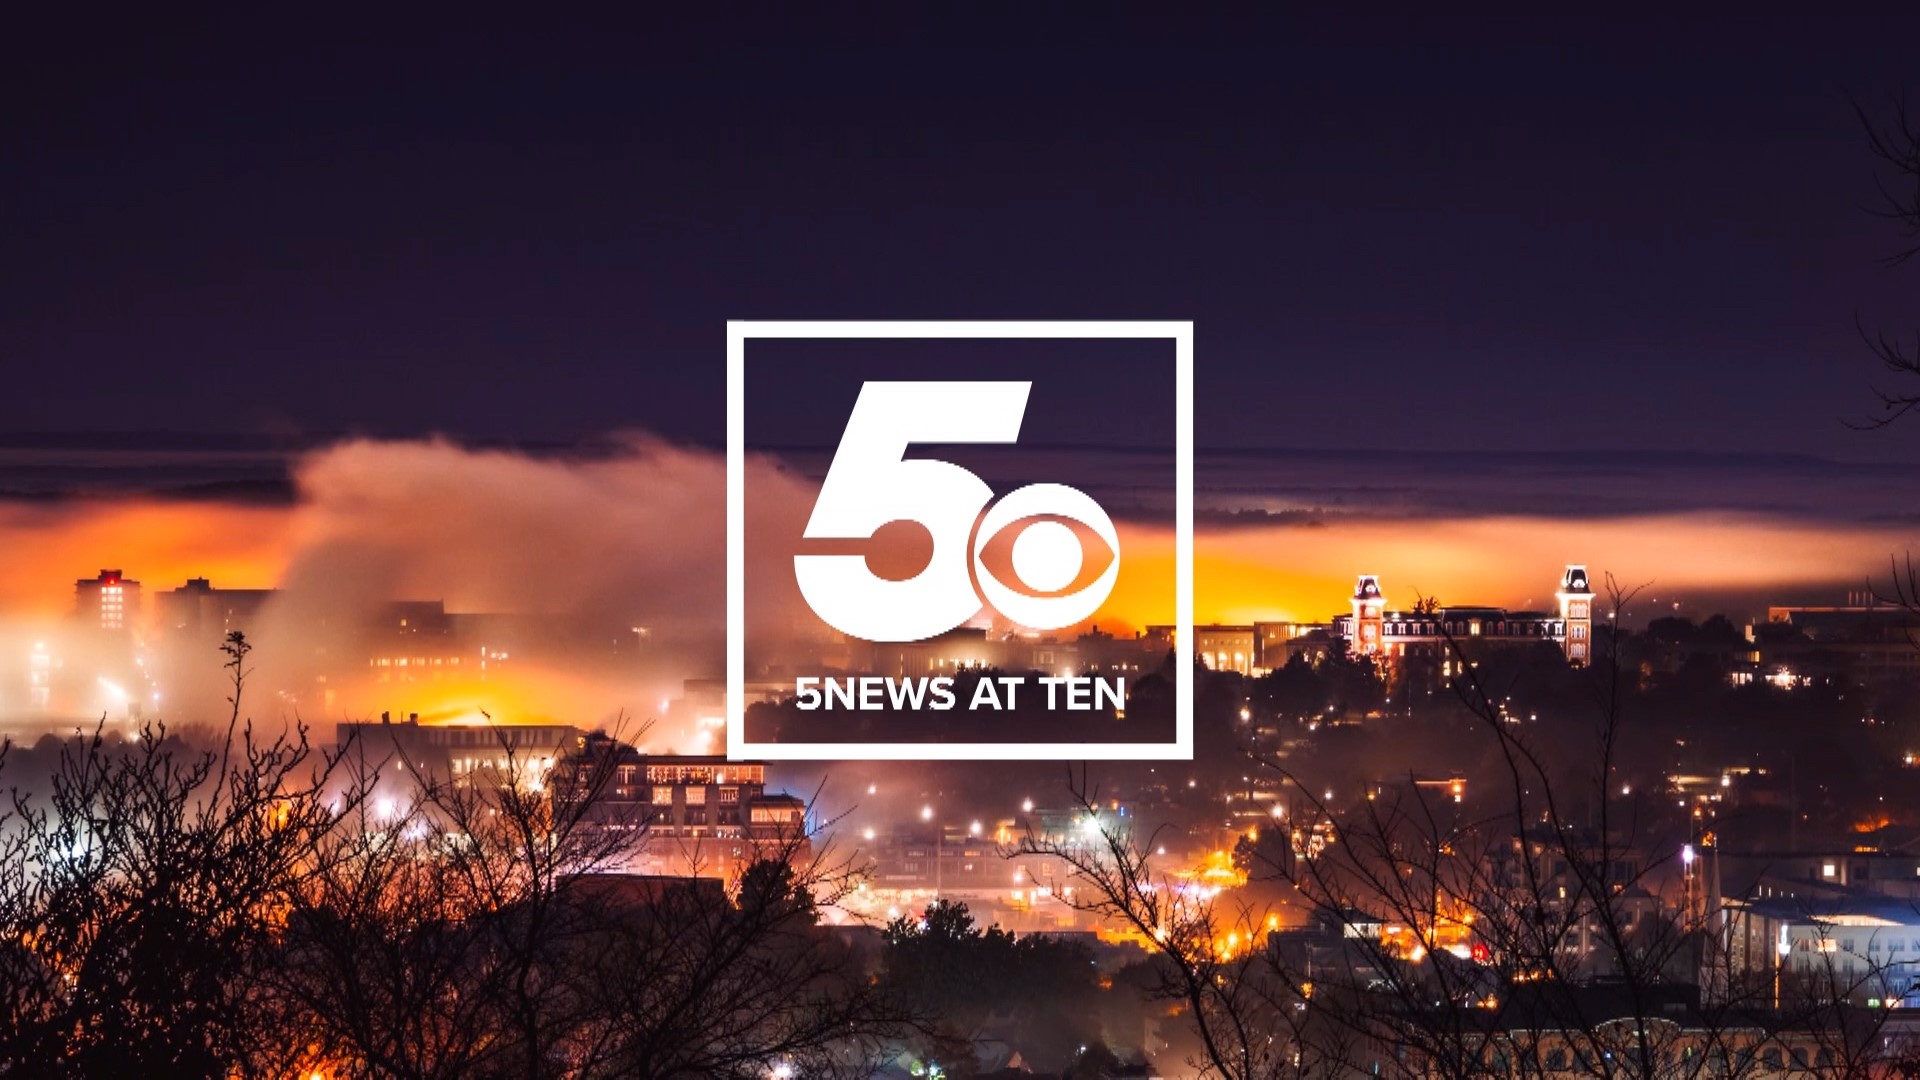 5NEWS brings you the latest news, weather, sports and traffic updates where you live. 